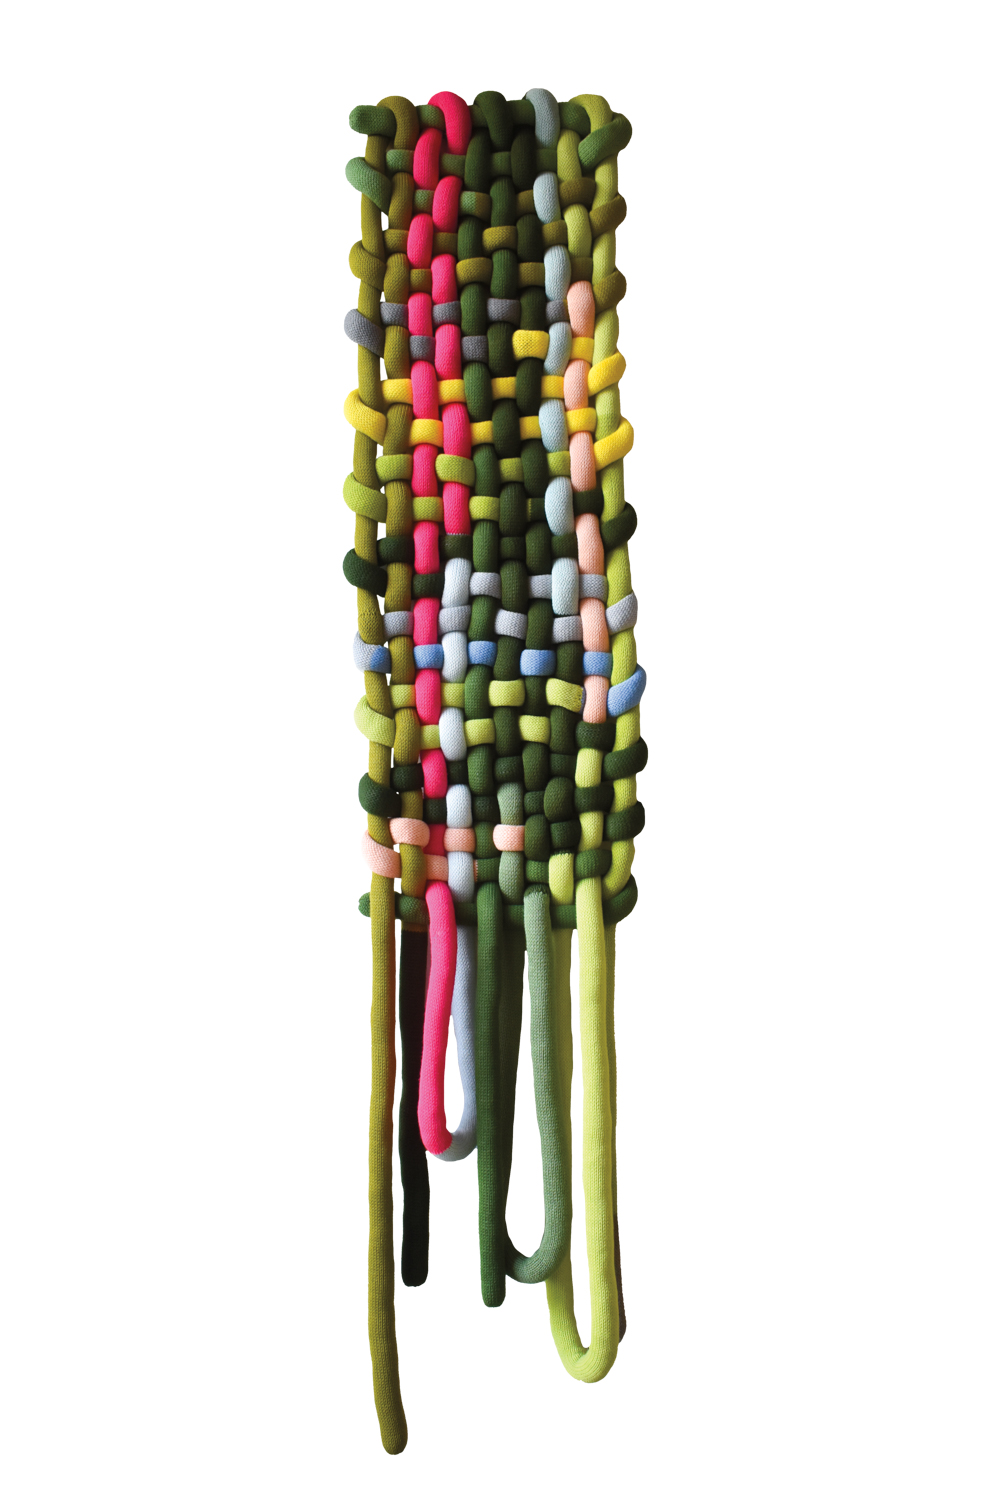 Green with pops of yellow, blue and pink jumbo knitted noodles, stuffed with polyester fiberfill then woven together